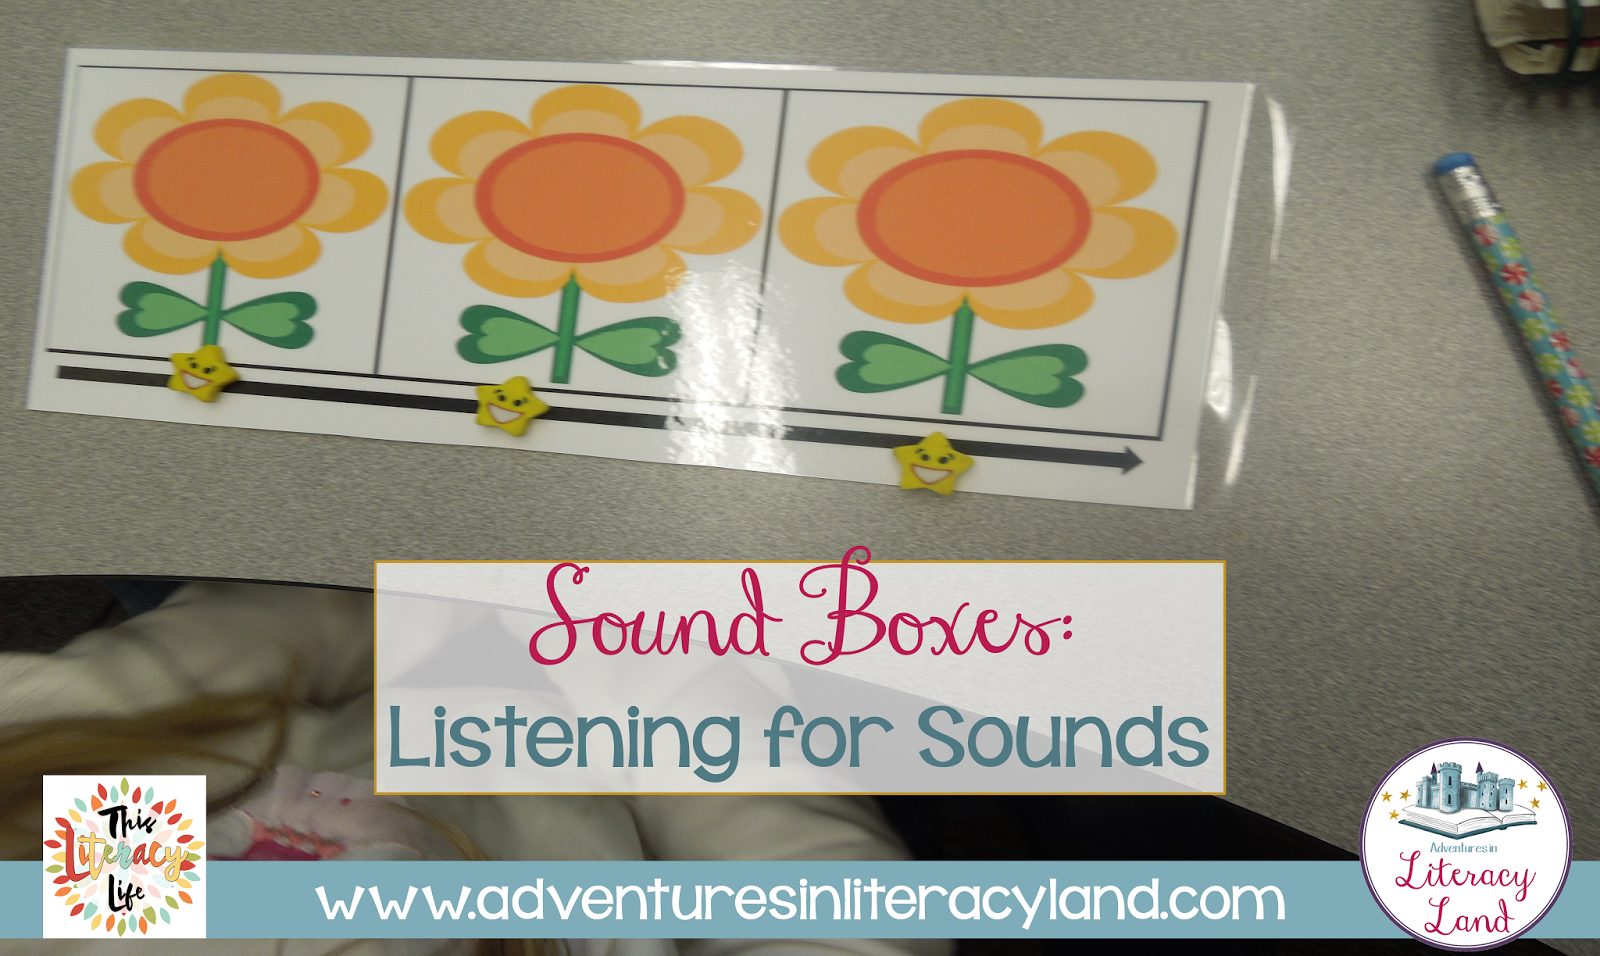 Sound boxes help students attend to sounds in words to help them read and write them.